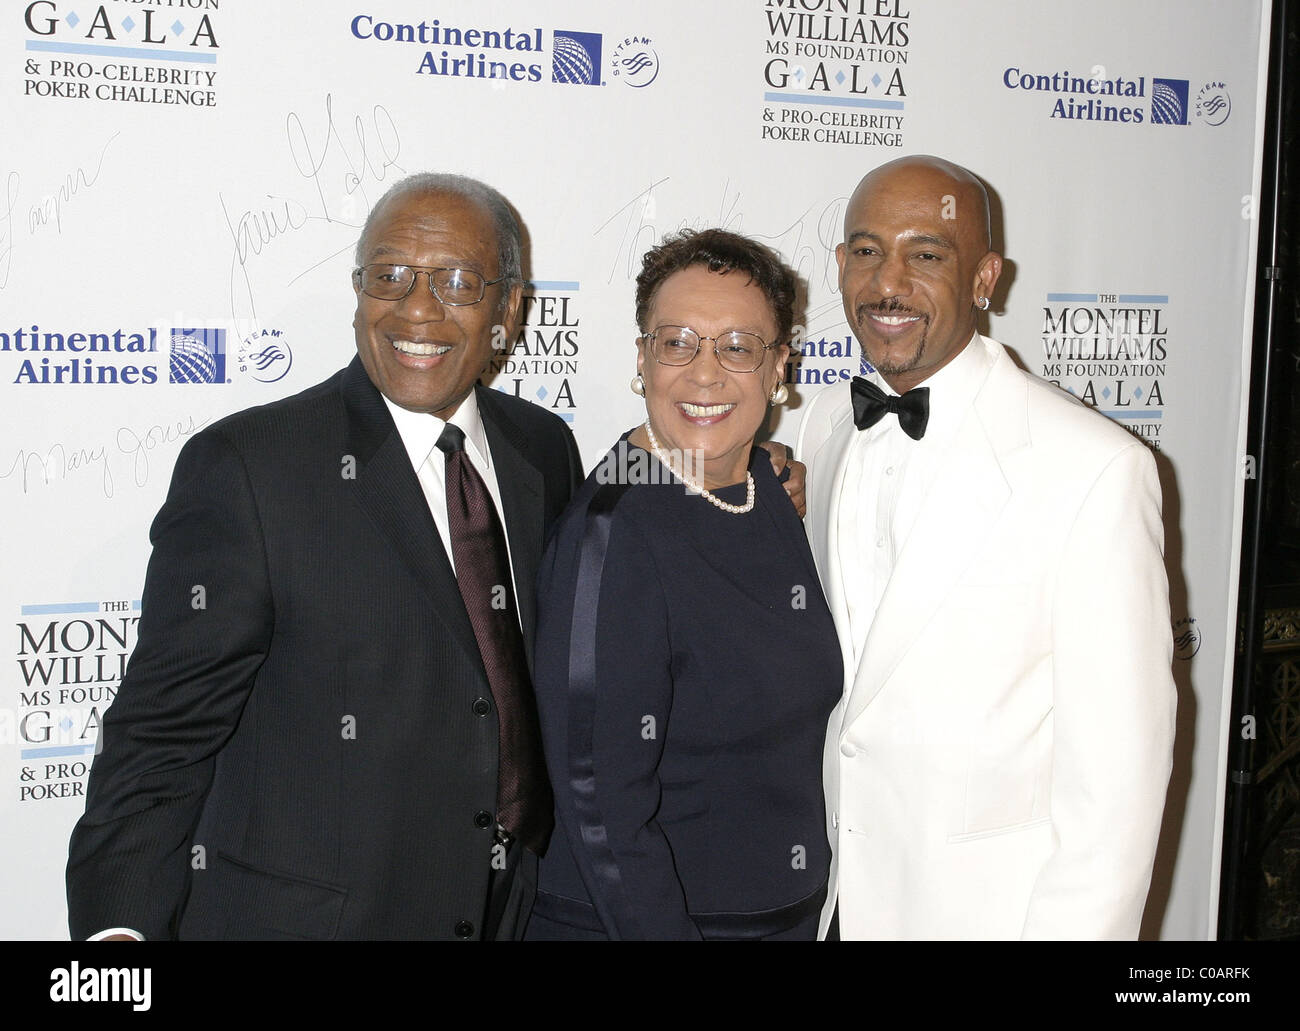 Montel Williams with his parents The Montel Williams MS Foundation Gala and Pro-Celebrity Poker Challenge at Cipriani New York Stock Photo